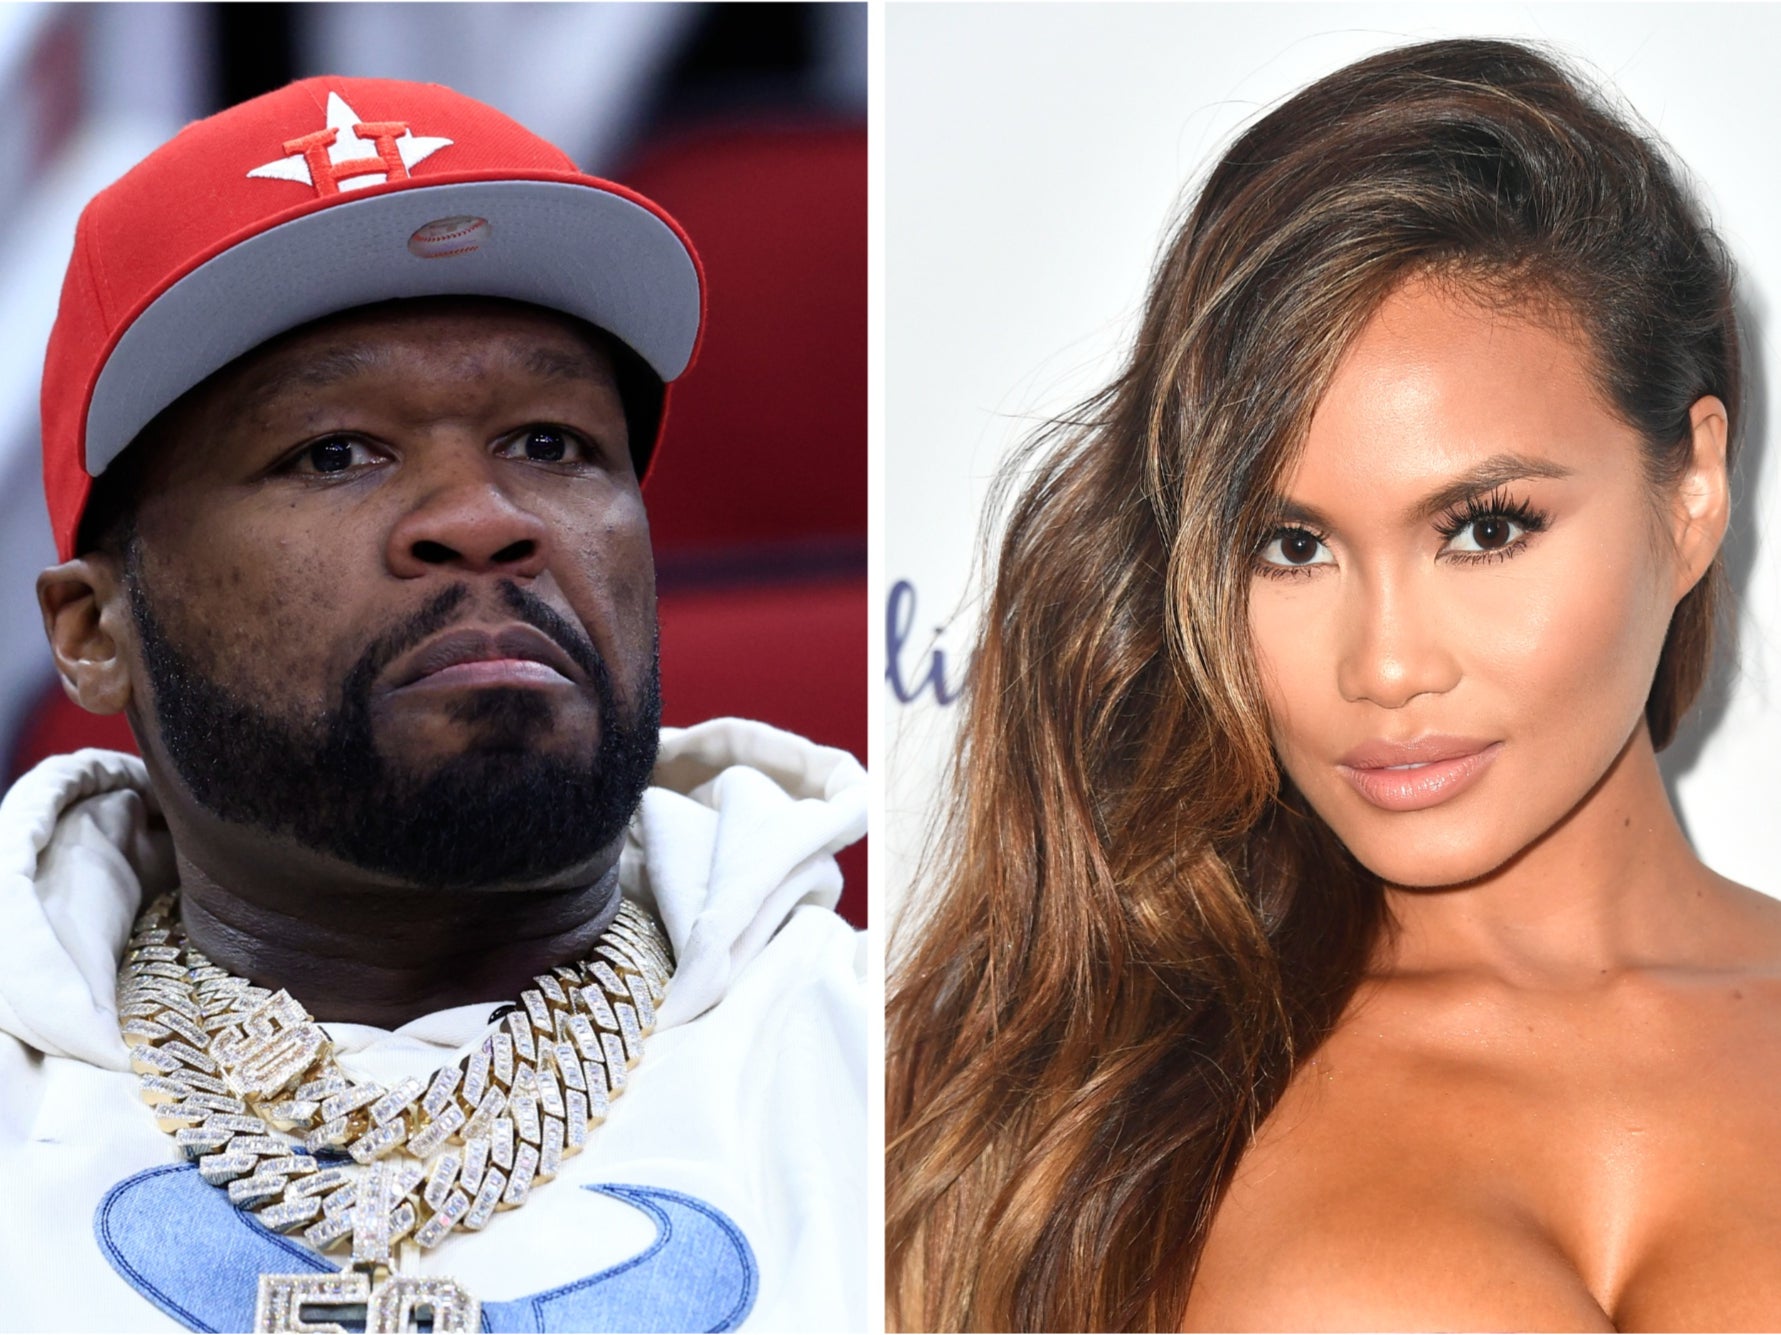 Daphne Joy and 50 Cent, pictured, were previously in a relationship